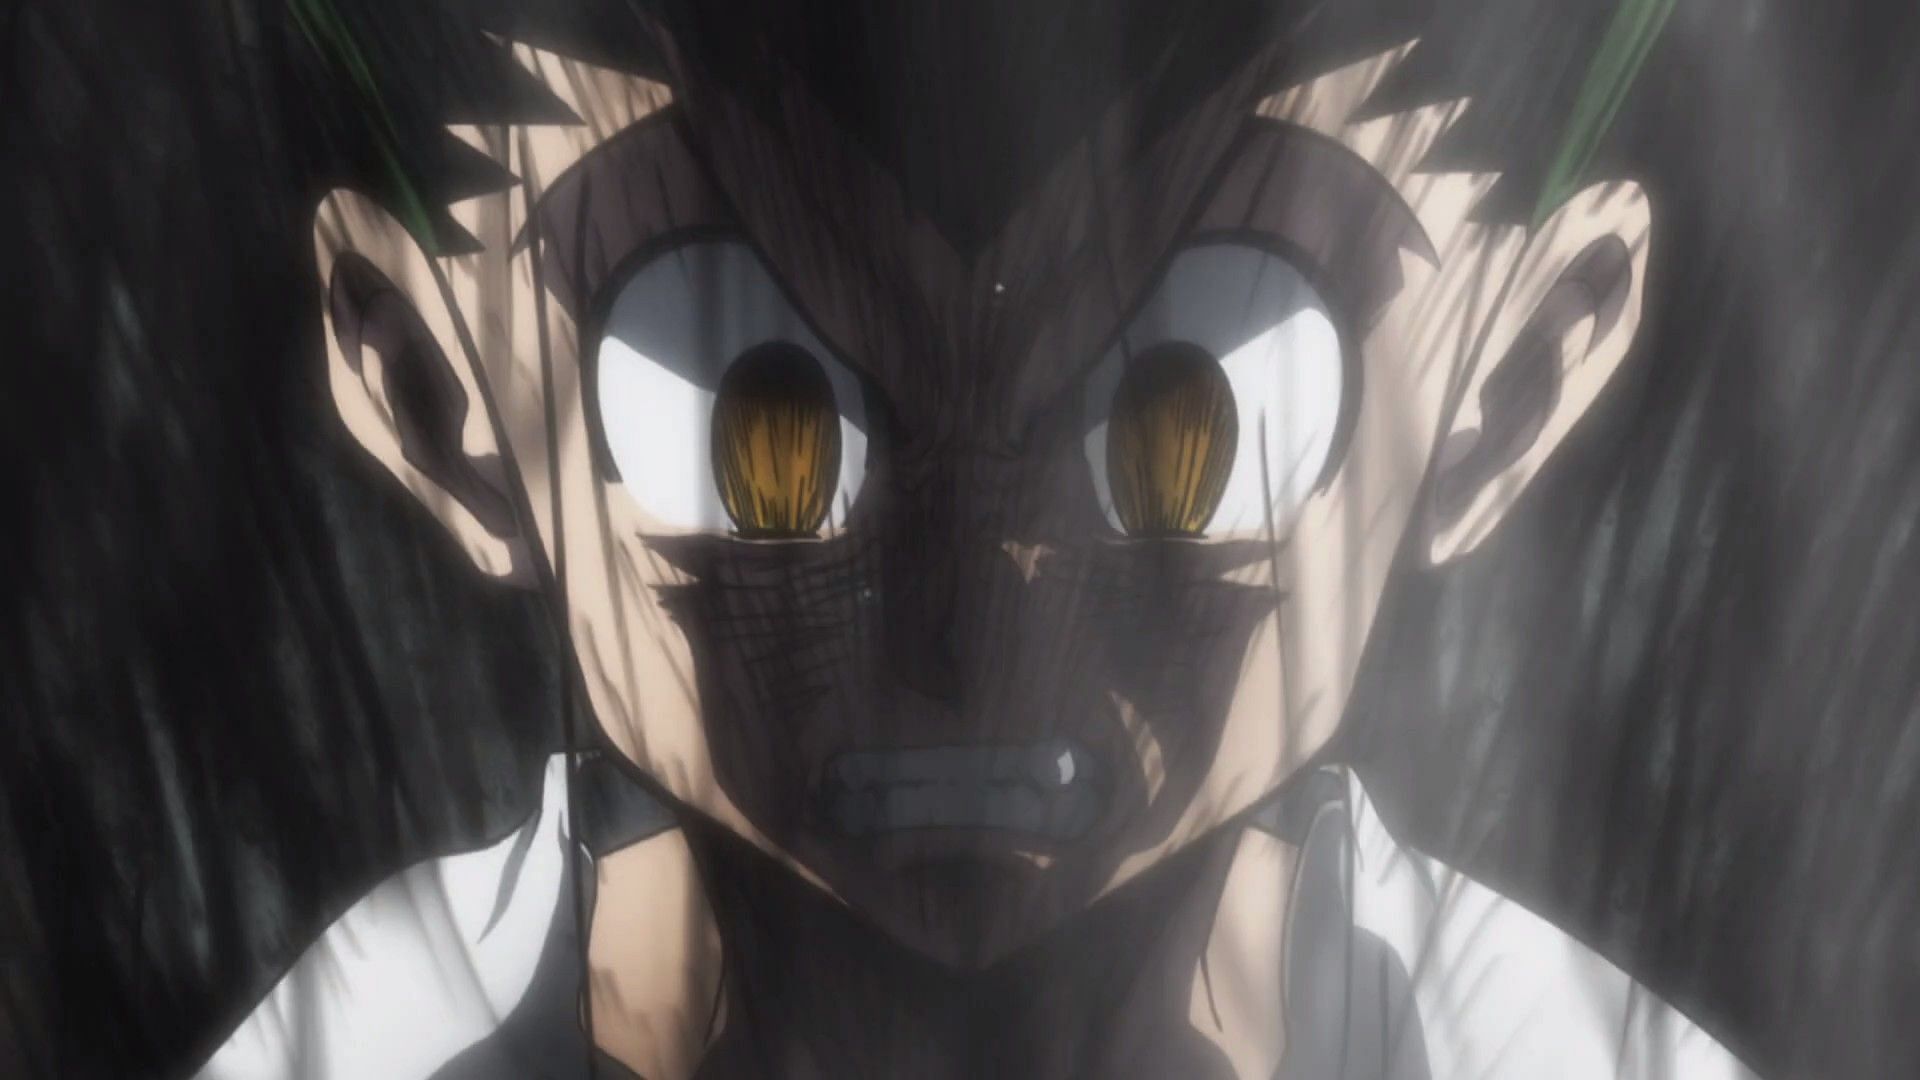 10 Most Satisfying Anime & Manga Rage Moments That Get The Blood Pumping